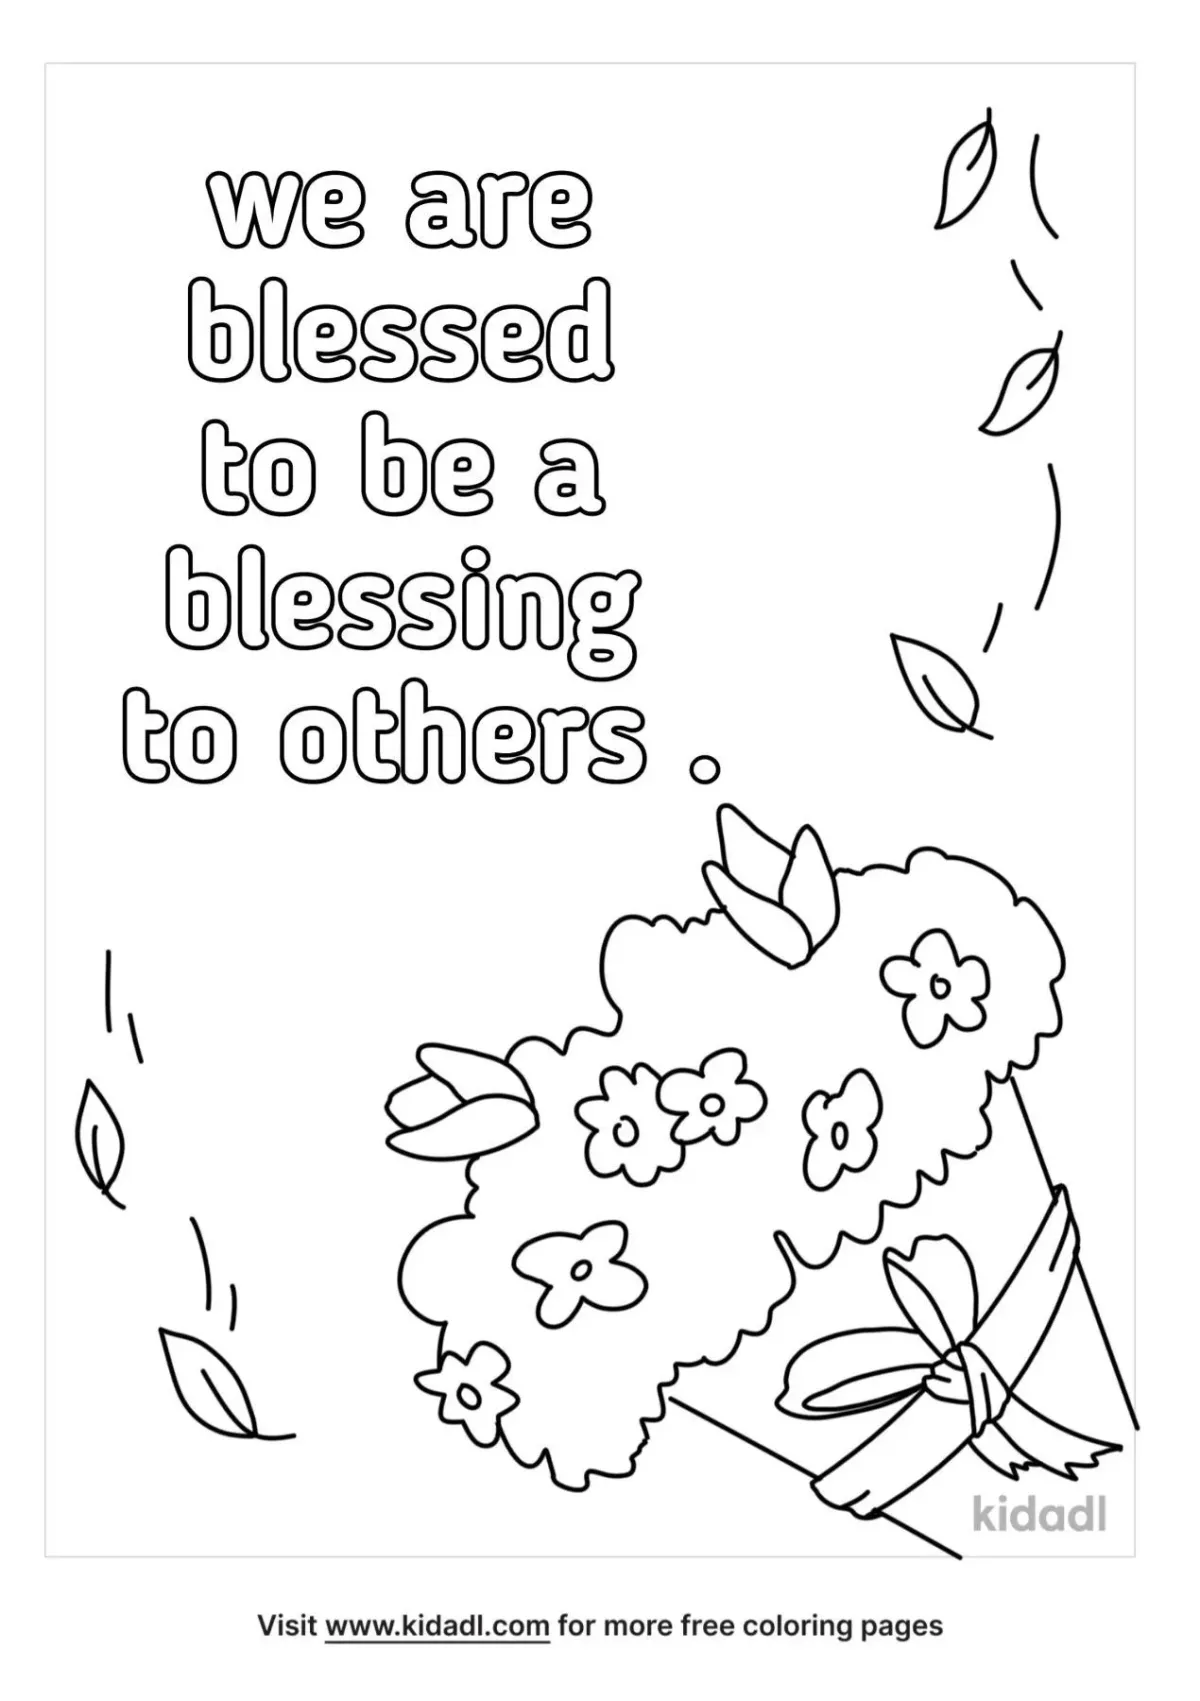 We Are Blessed To Be A Blessing To Others